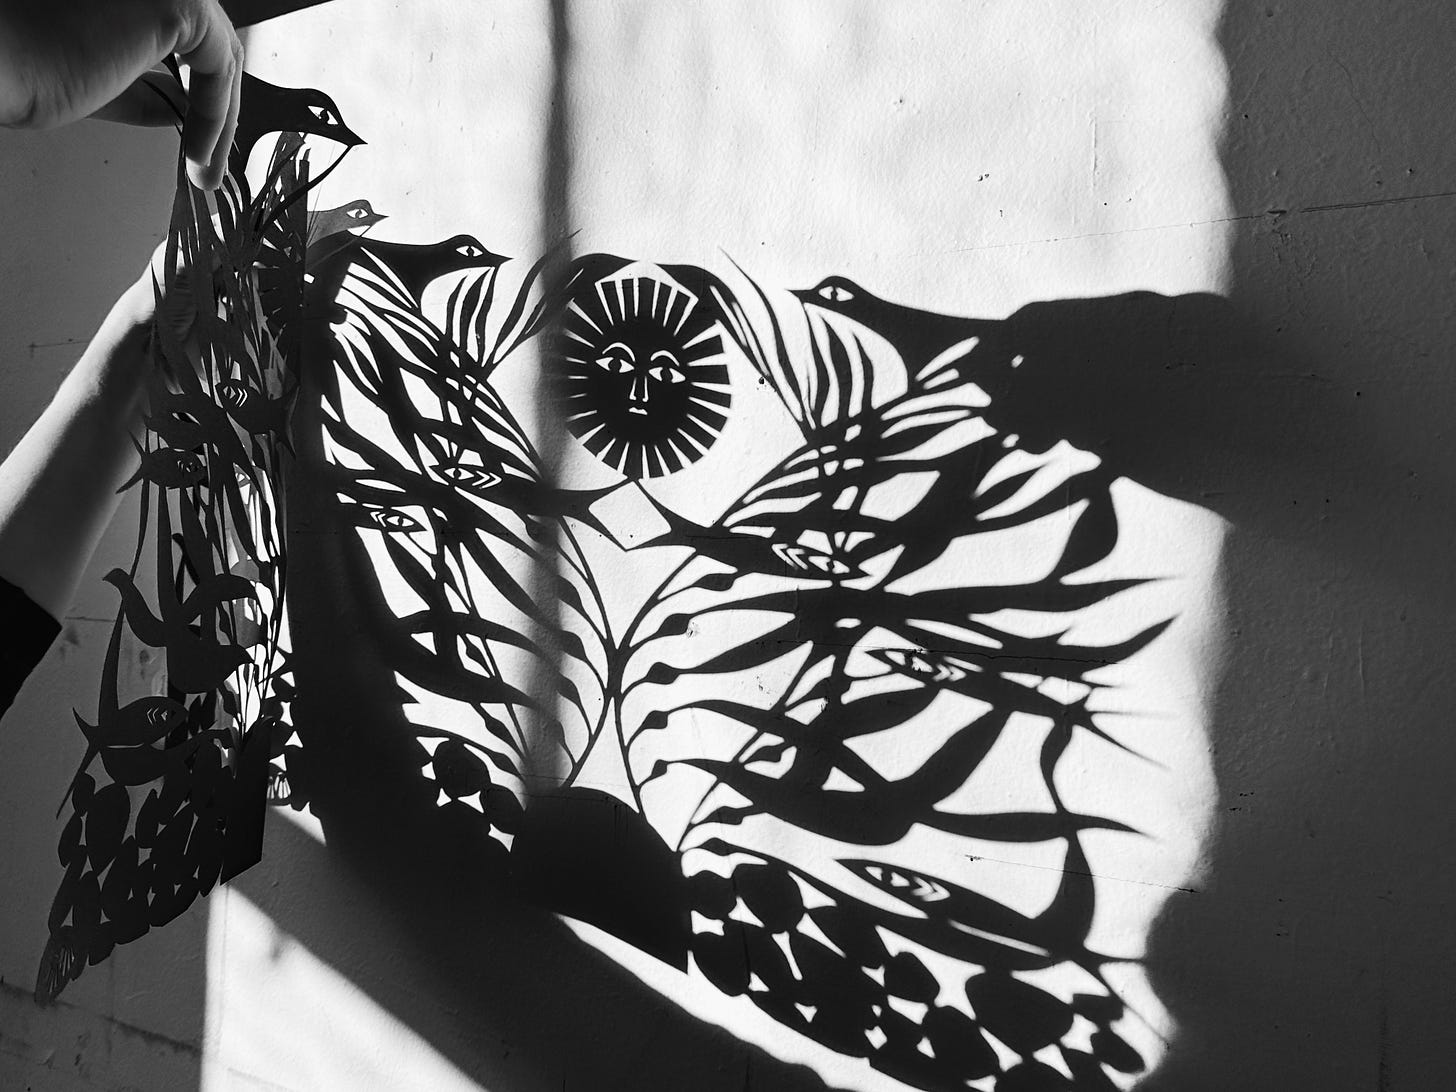 Beautiful reflection of a papercut piece of work against a wall with sunlight coming through